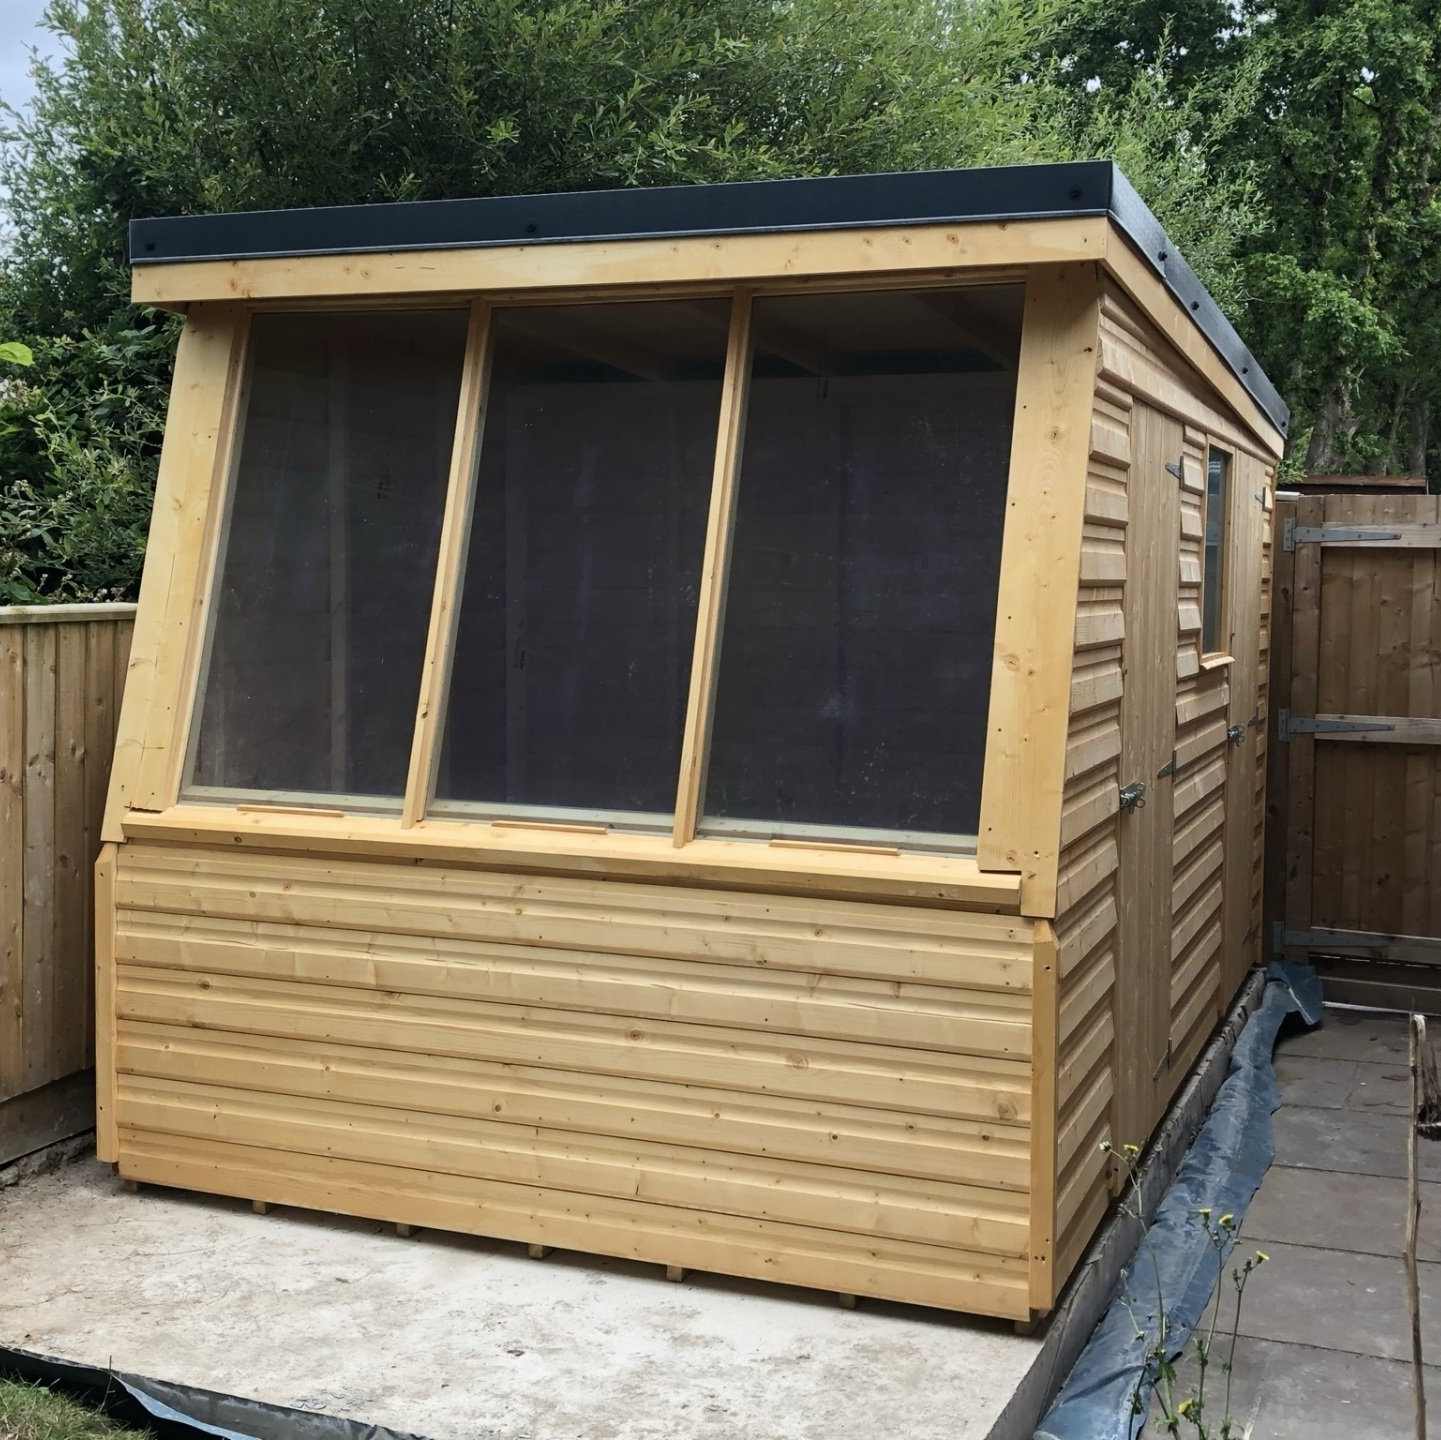 7' x 12' Potting shed combined with storage shed at the back and metal box profile sheets on the roof.